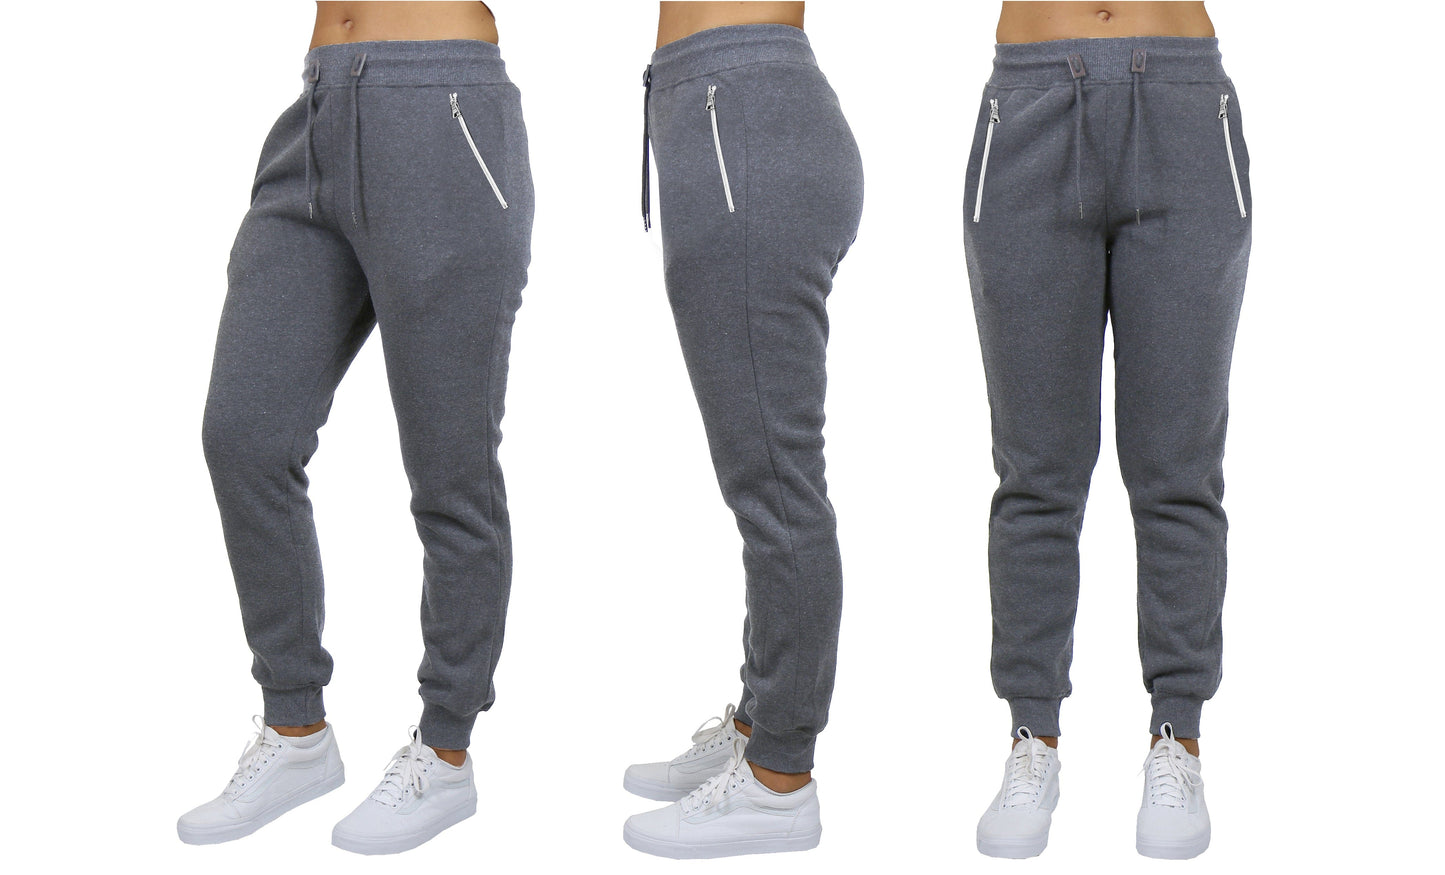 BGSM Men's Loose Fit Winter Sweatpants with Zippered Pockets